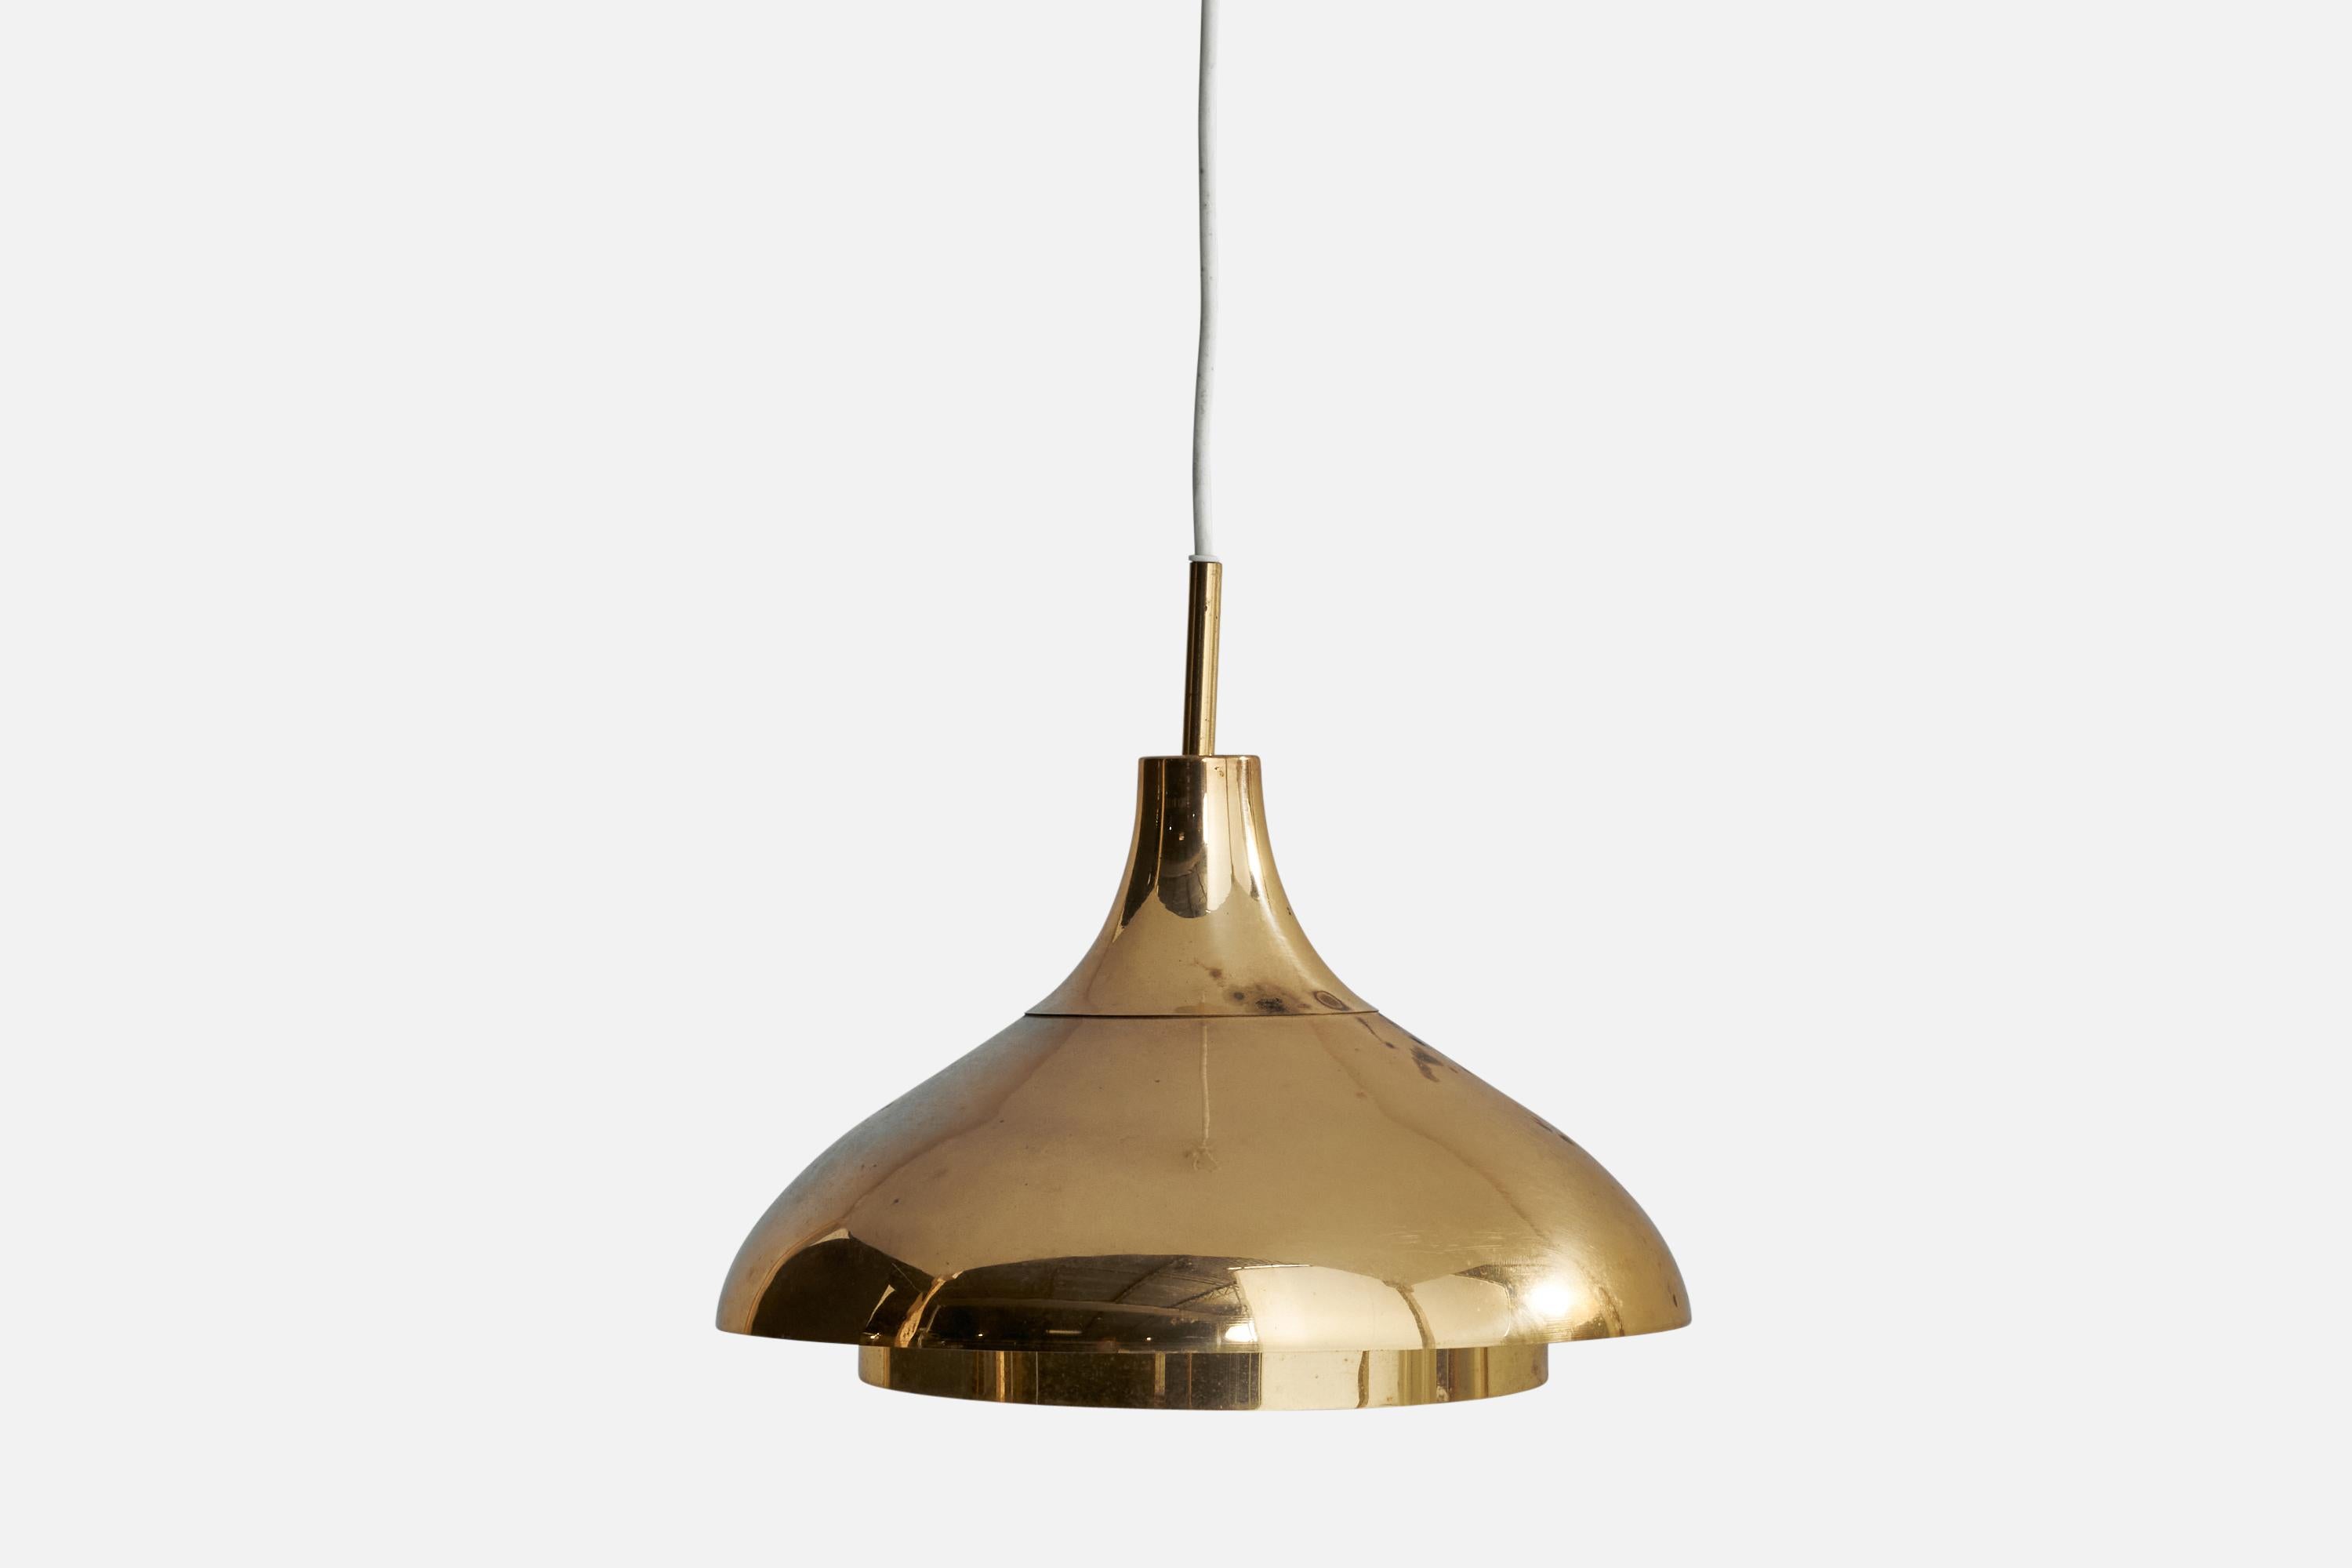 A brass pendant light designed and produced in Sweden, c. 1950s.

Dimensions of canopy (inches): n/a
Socket takes standard E-26 bulb. 1 socket.There is no maximum wattage stated on the fixture. All lighting will be converted for US usage. We are